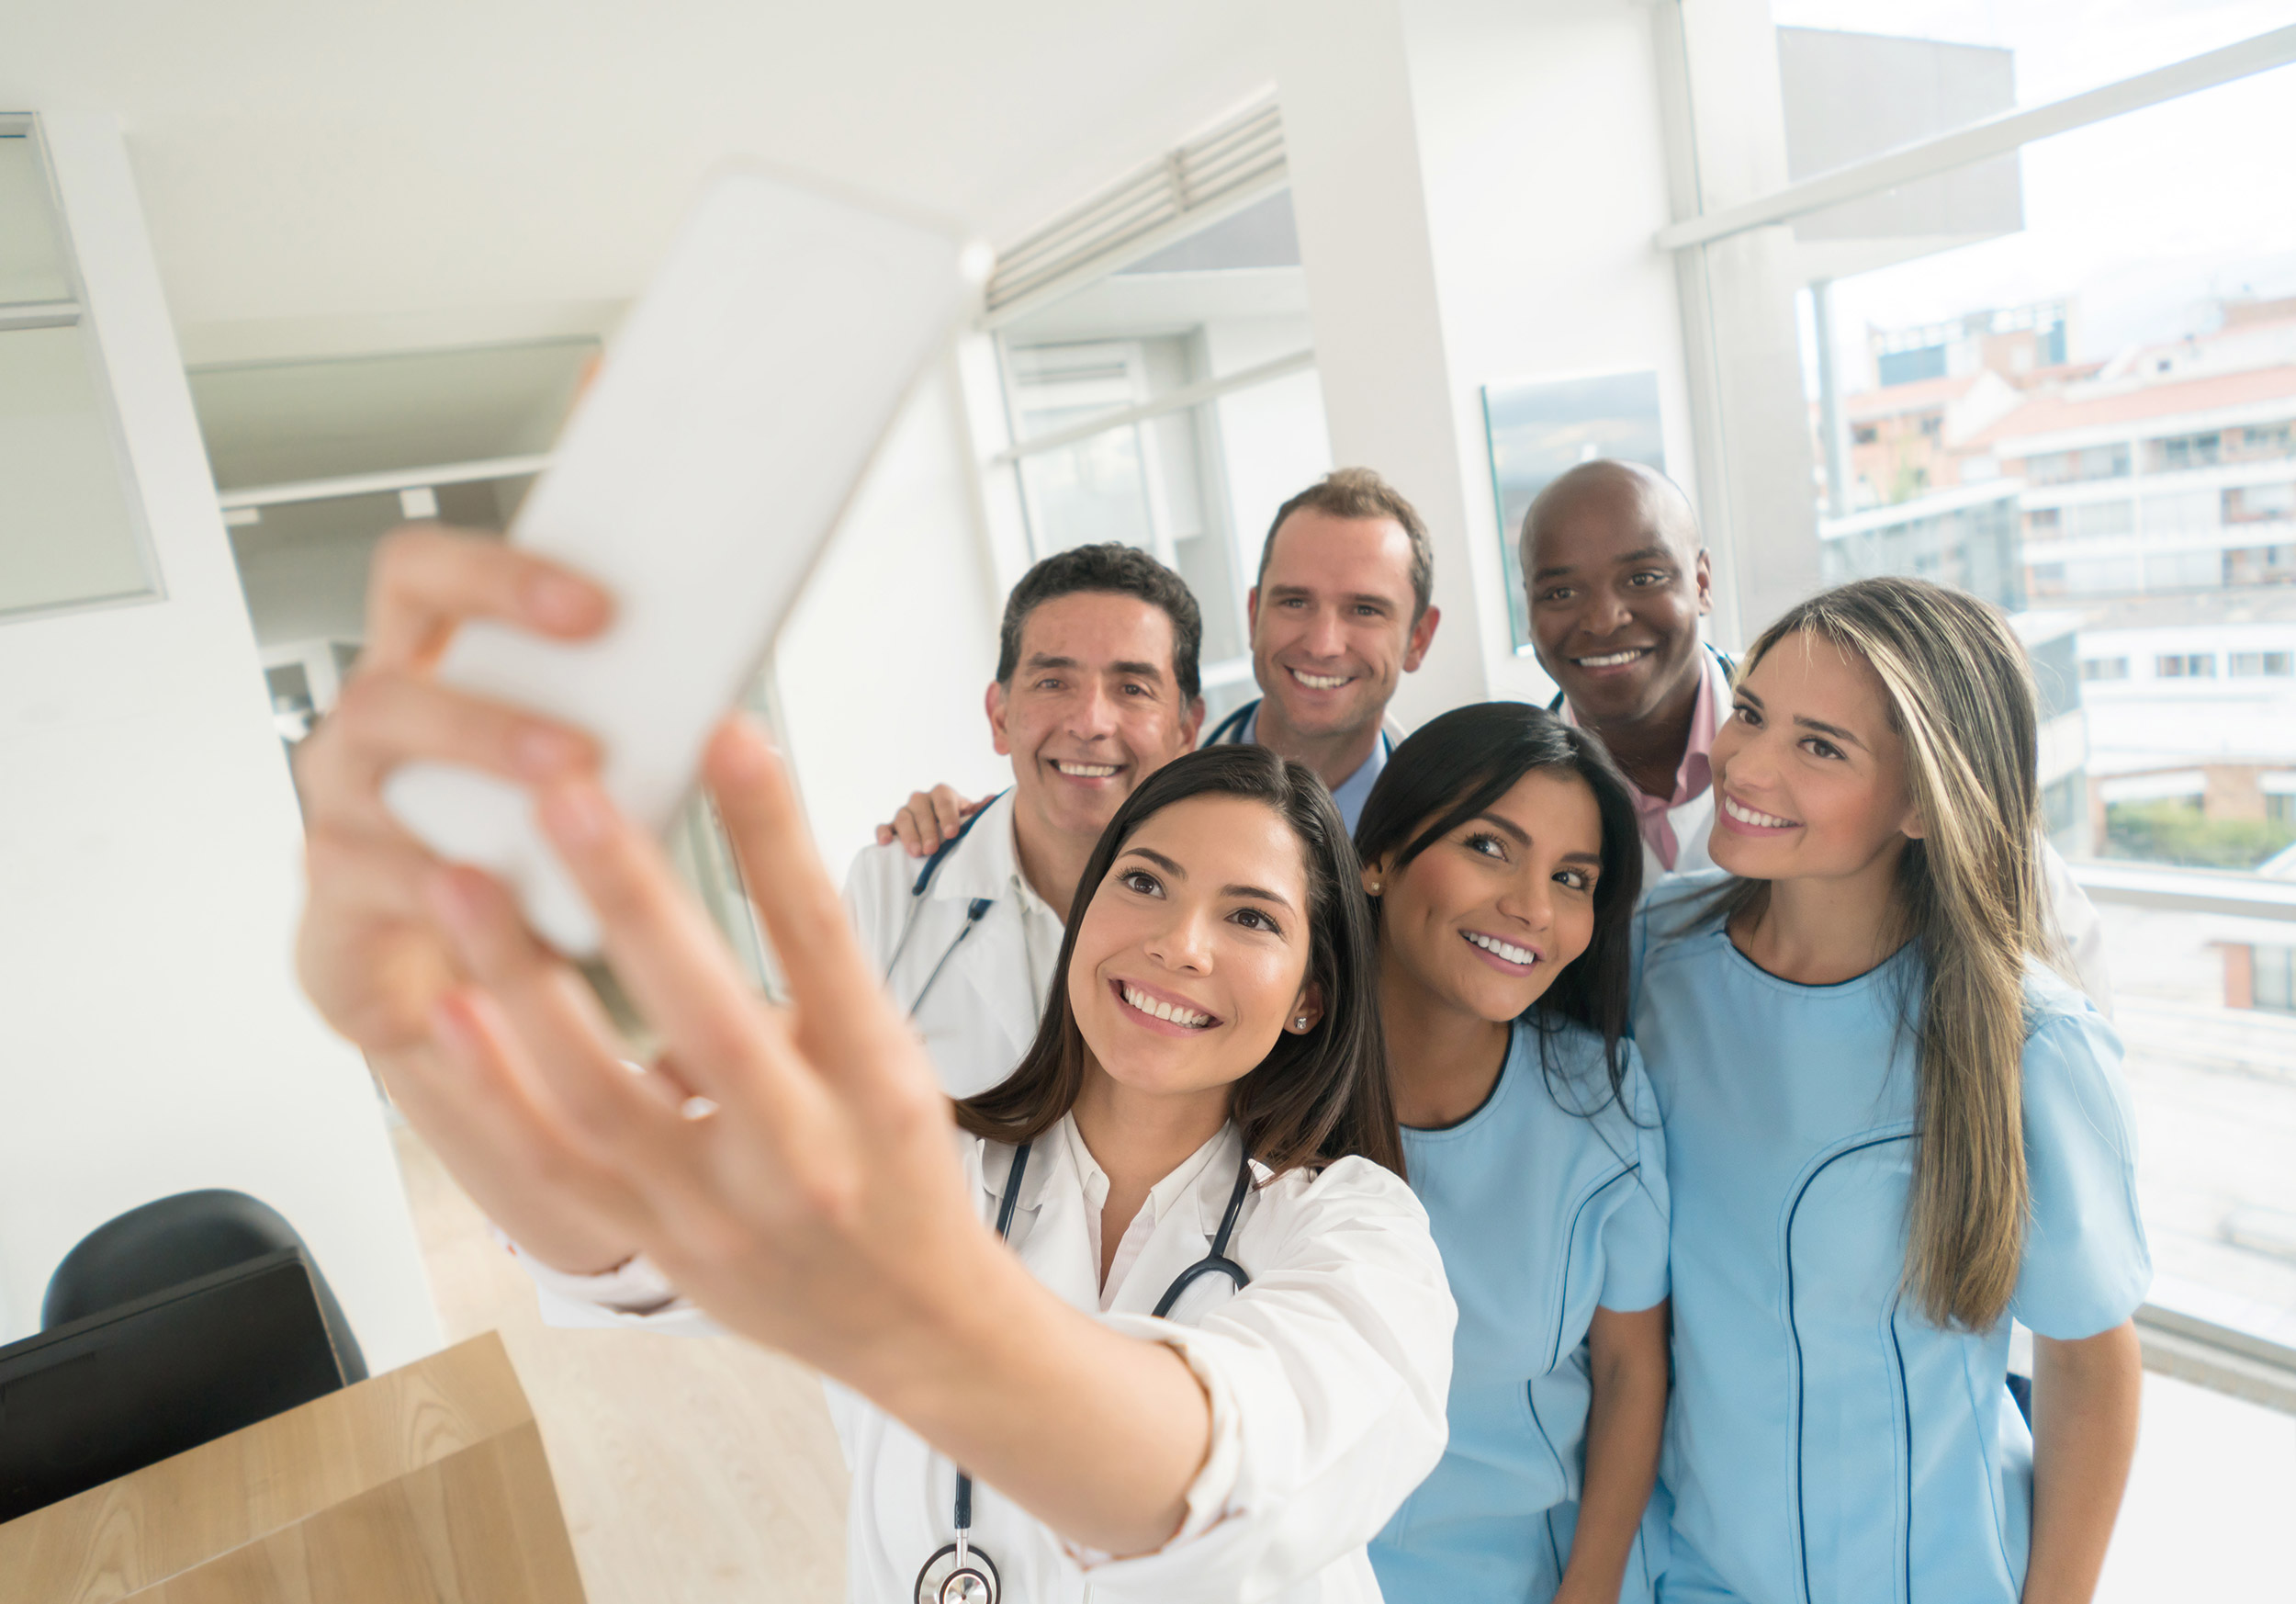 How Social Media Benefits Both Urologists and Their Patients